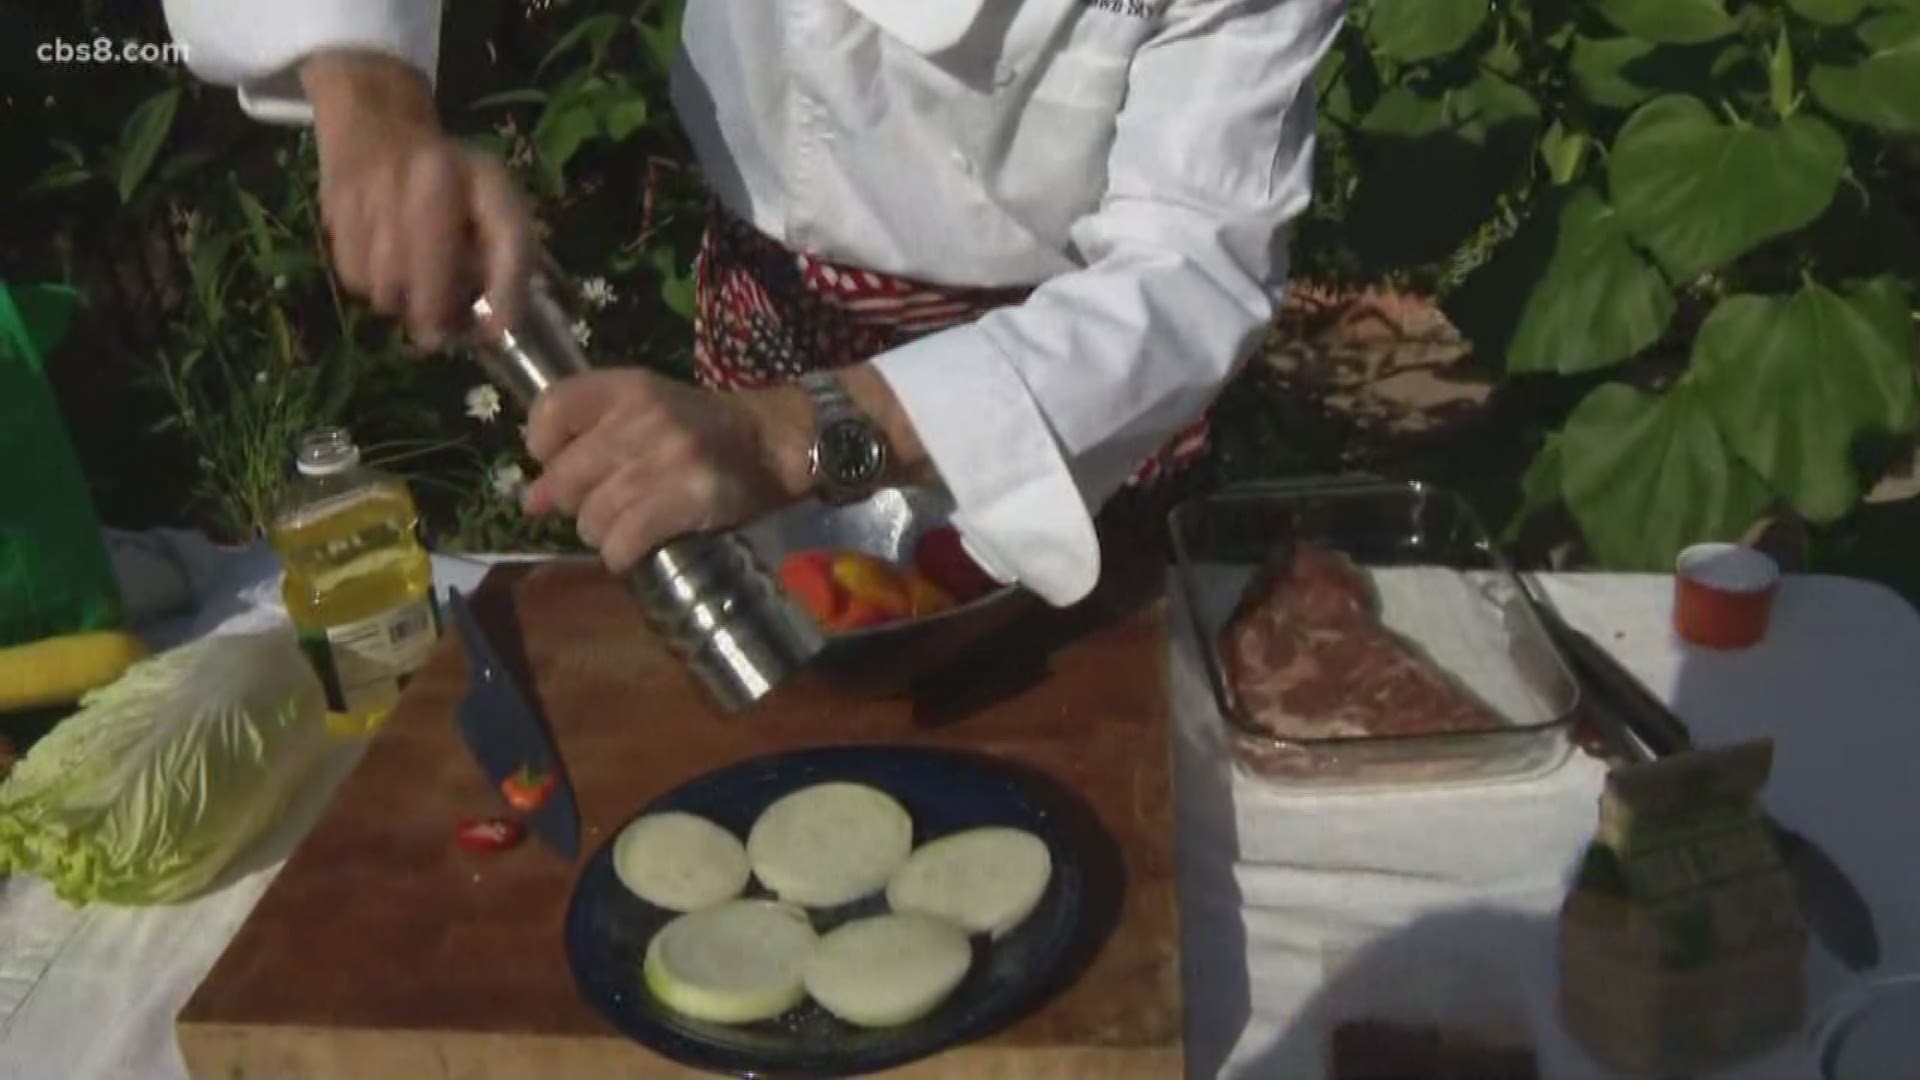 Enjoy these recipes from News 8's Shawn Styles to make your Memorial Day weekend extra tasty.